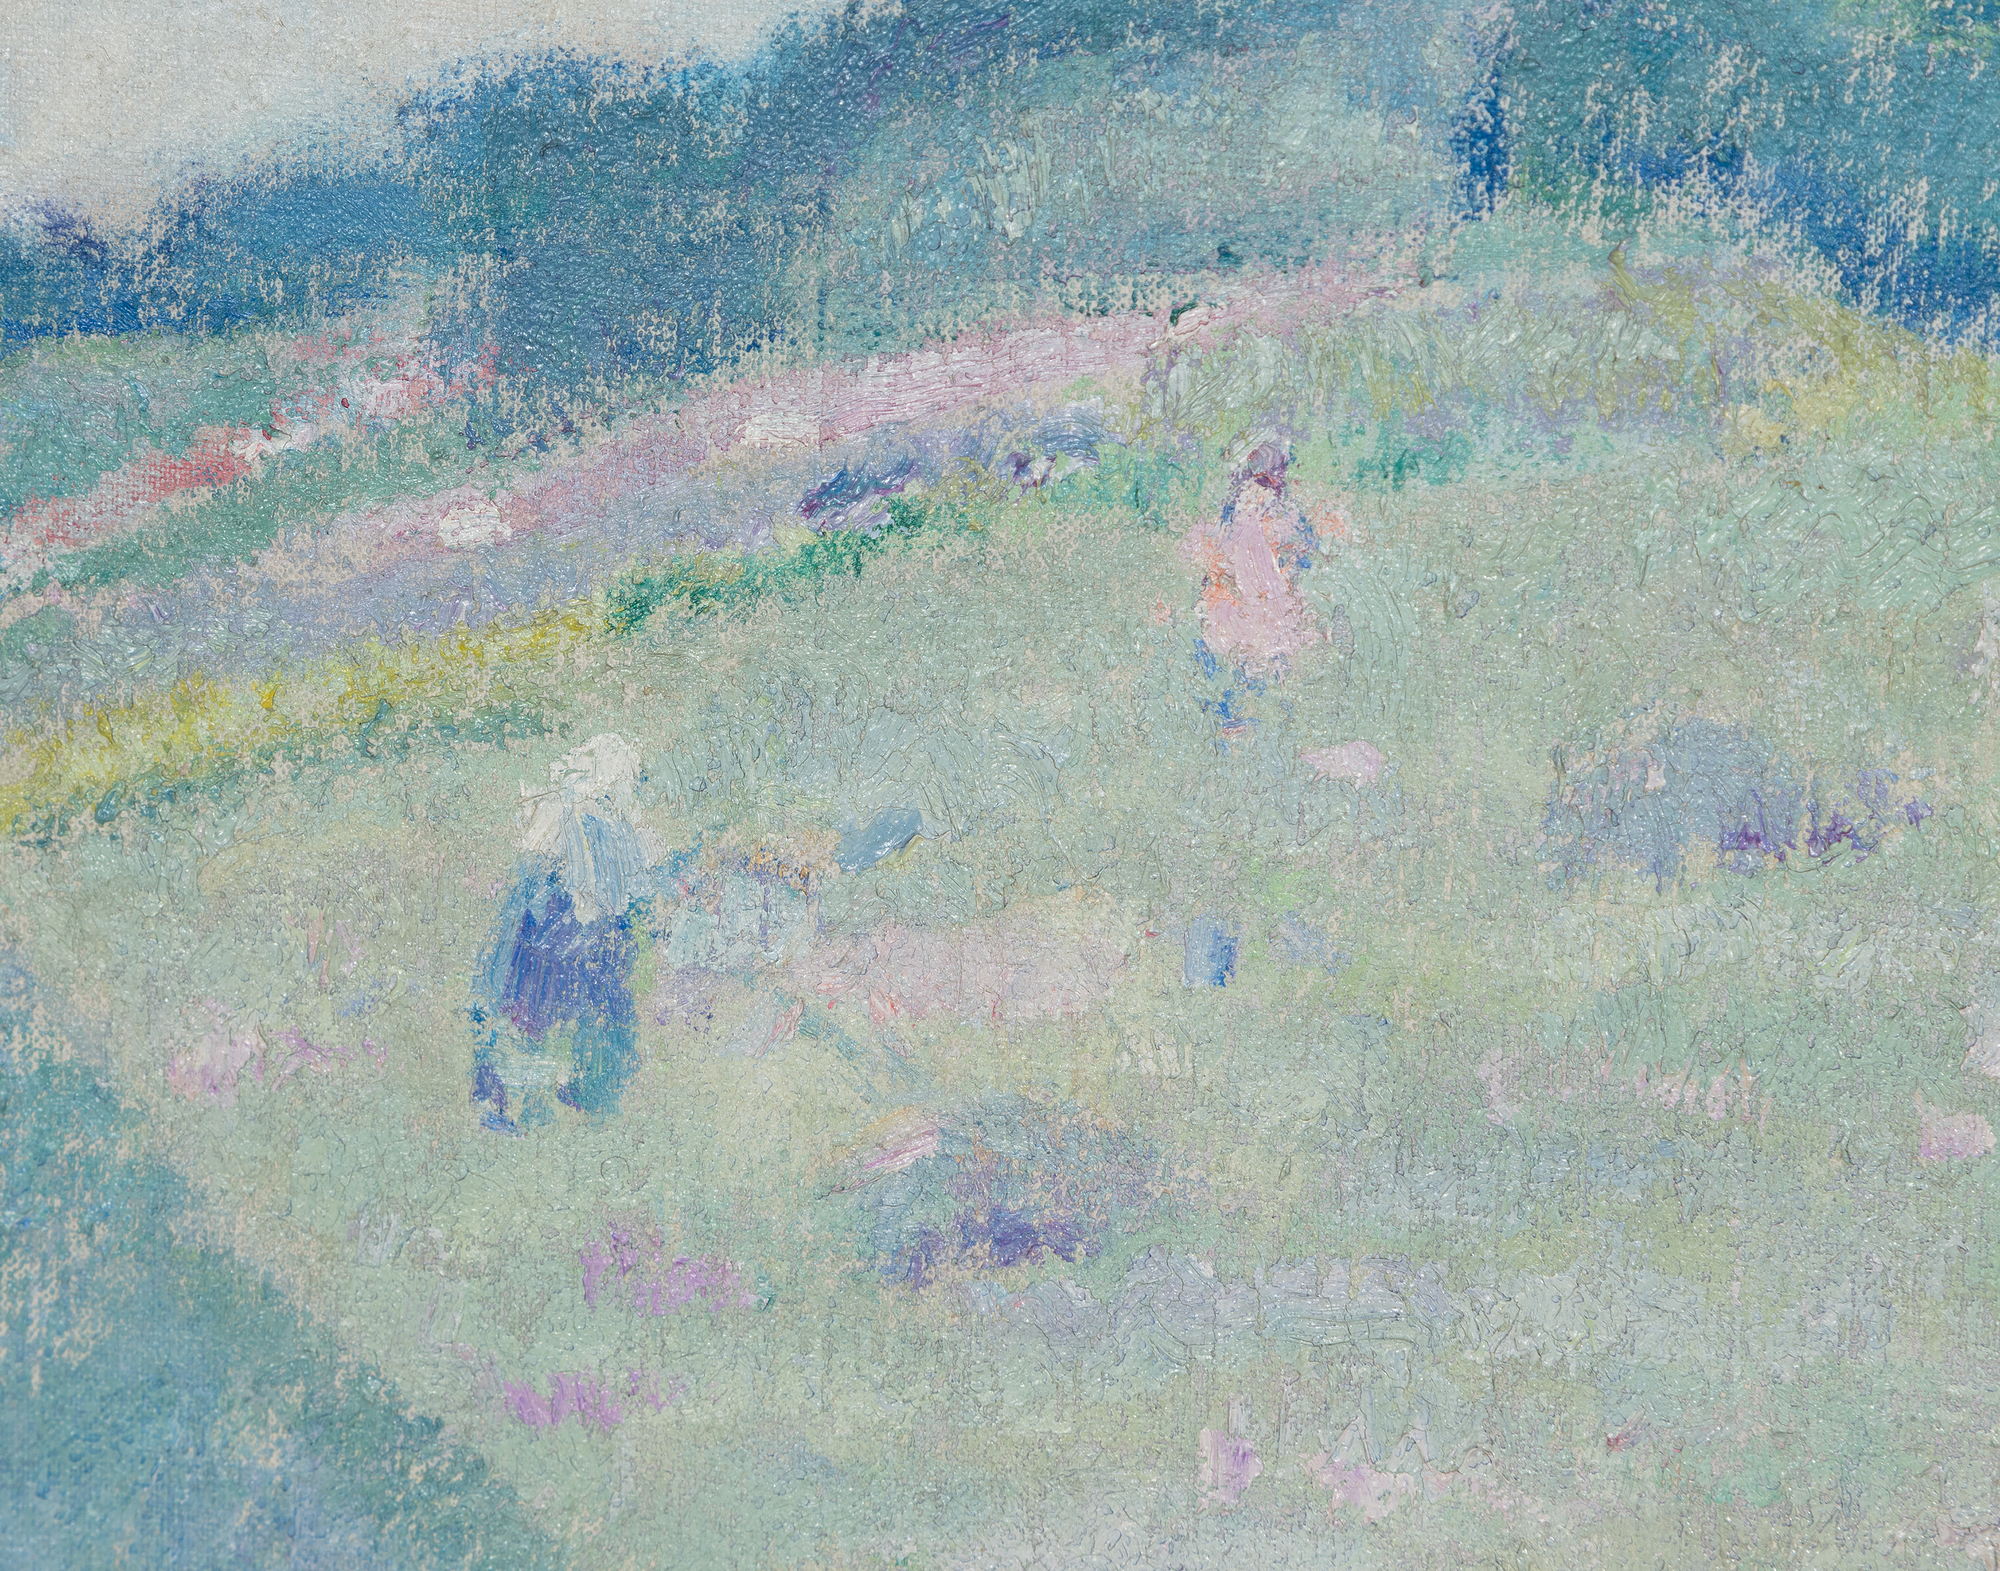 FREDERICK CARL FRIESEKE - Colline à Giverny - huile sur toile - 25 1/4 x 31 1/4 in.